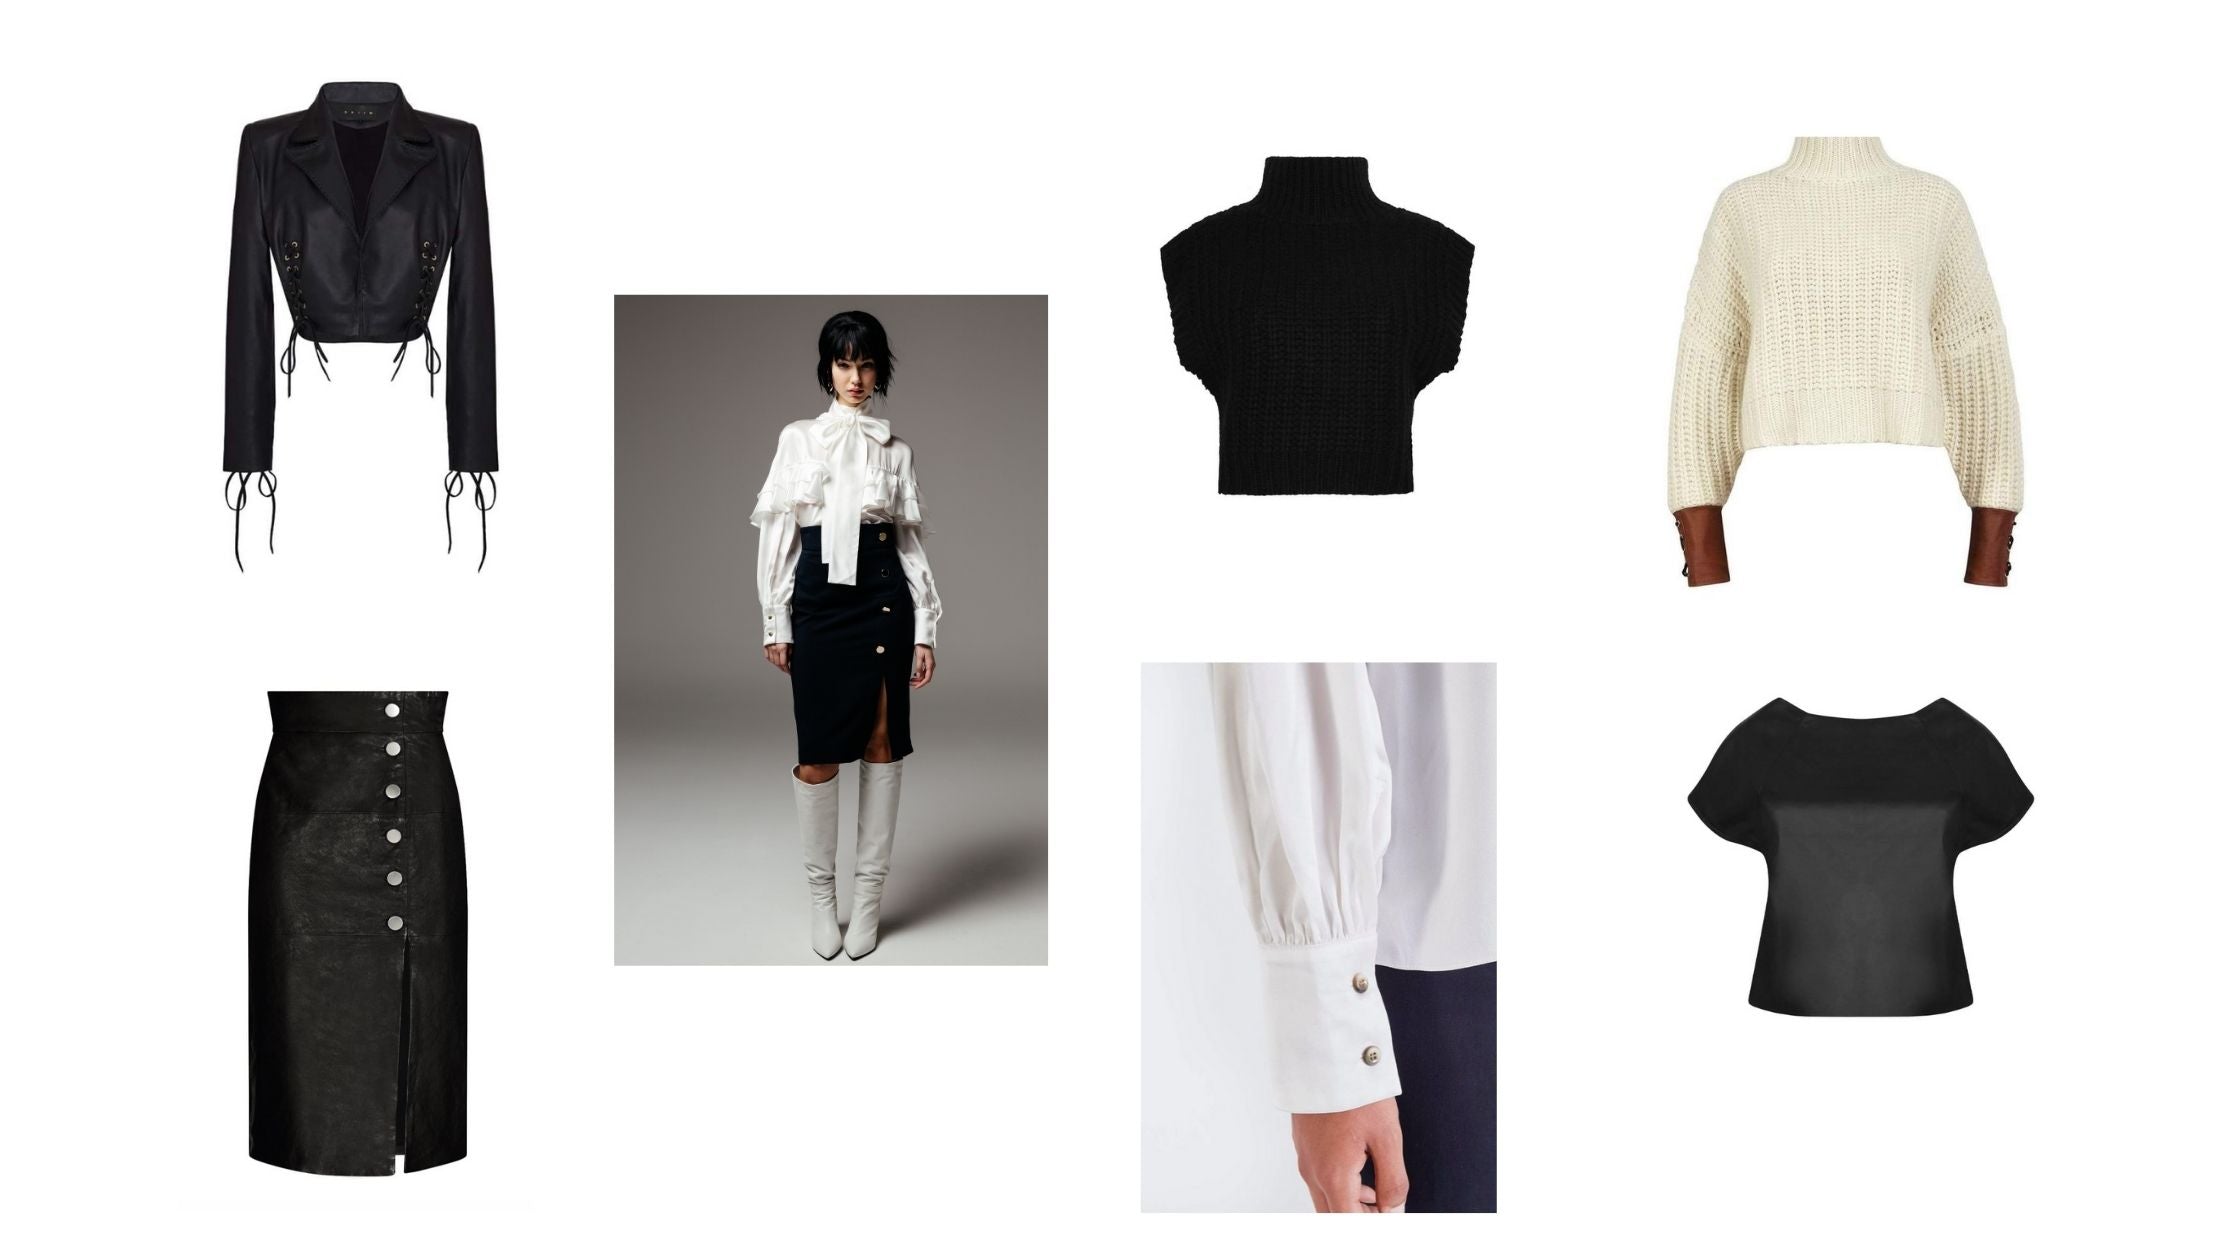 casual-christmas-outfits-from-office-to-office-party-leather-skirts-and-jackets-with-cashmere-jumpers